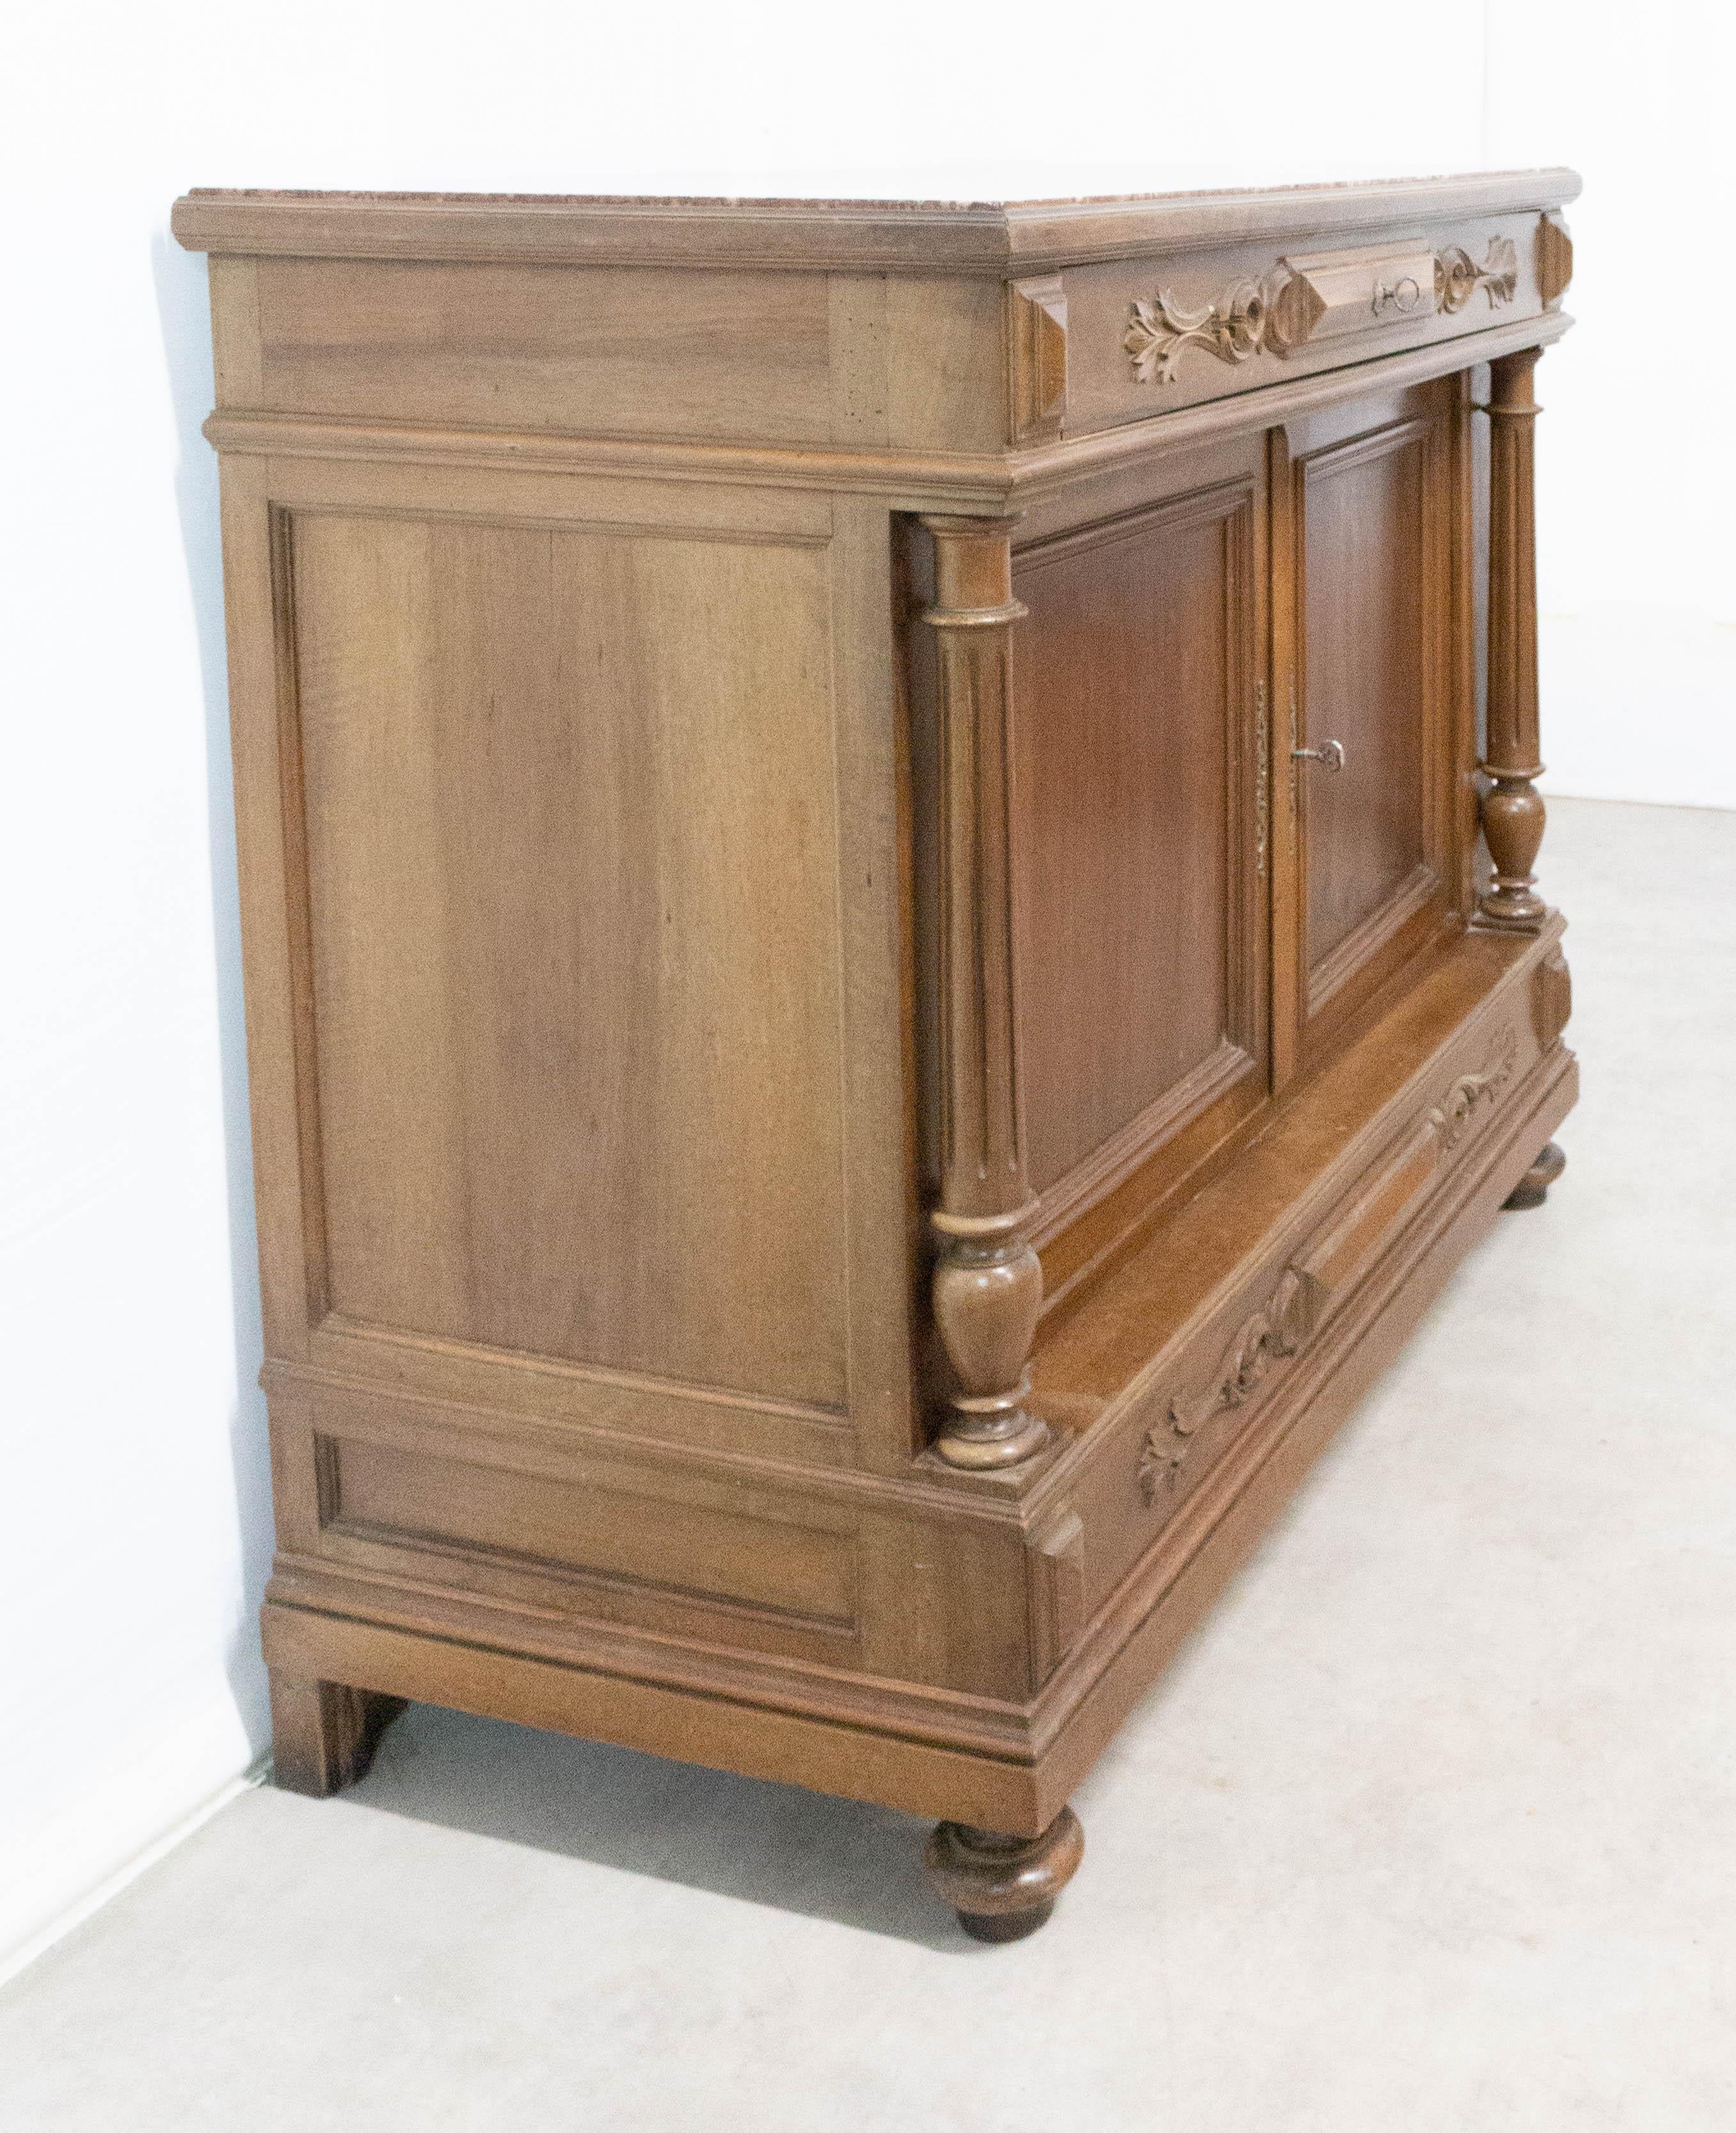 Commode French chest of drawers late 19th century classical style marble top, circa 1900
Walnut
Unusual: three drawers inside
Good antique condition, with minor signs of age and wear.

Shipping:
55/115/103 cm 83 kg.